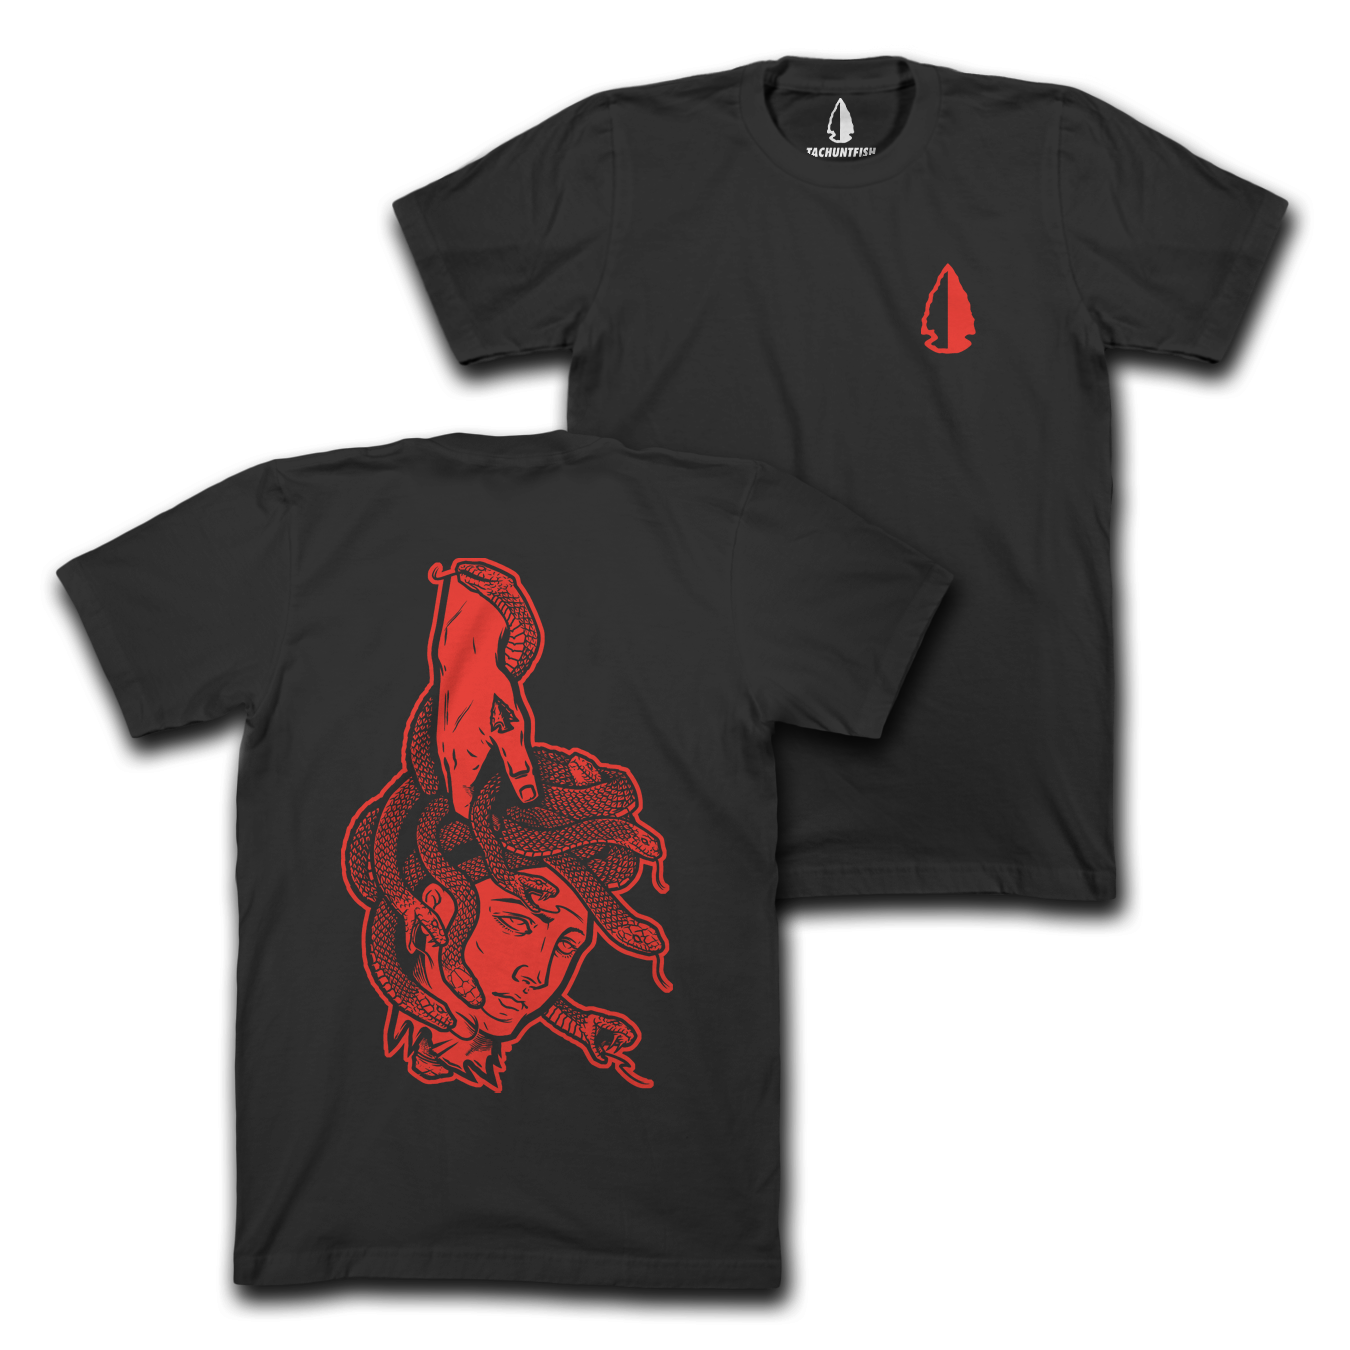 Beheaded Black and Red Tee